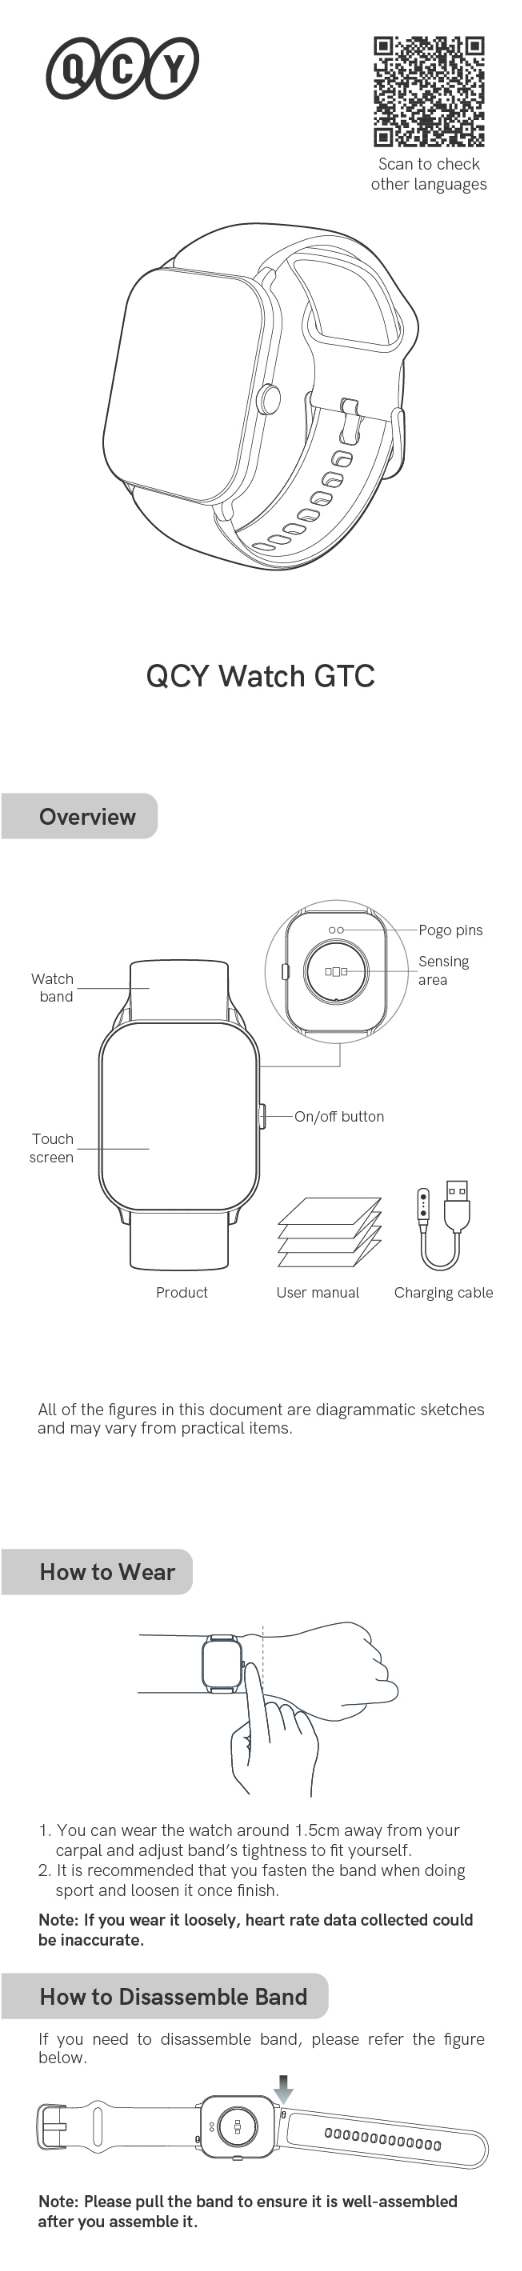 Digital Watches Instructions